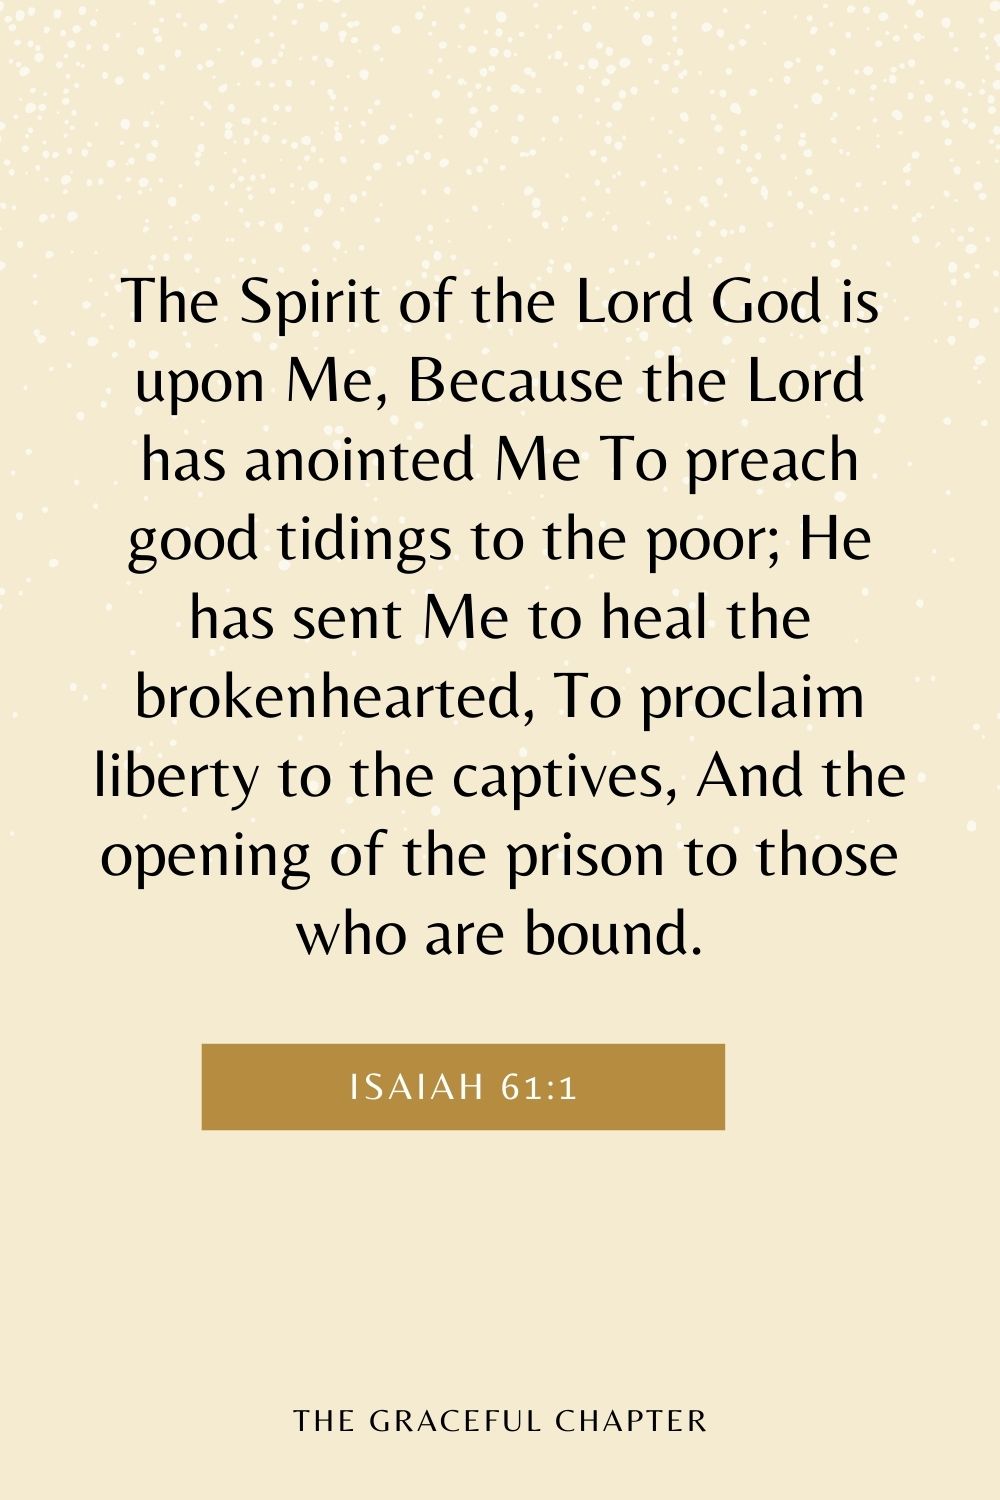 The Spirit of the Lord God is upon Me, Because the Lord has anointed Me To preach good tidings to the poor; He has sent Me to heal the brokenhearted, To proclaim liberty to the captives, And the opening of the prison to those who are bound. Isaiah 61:1